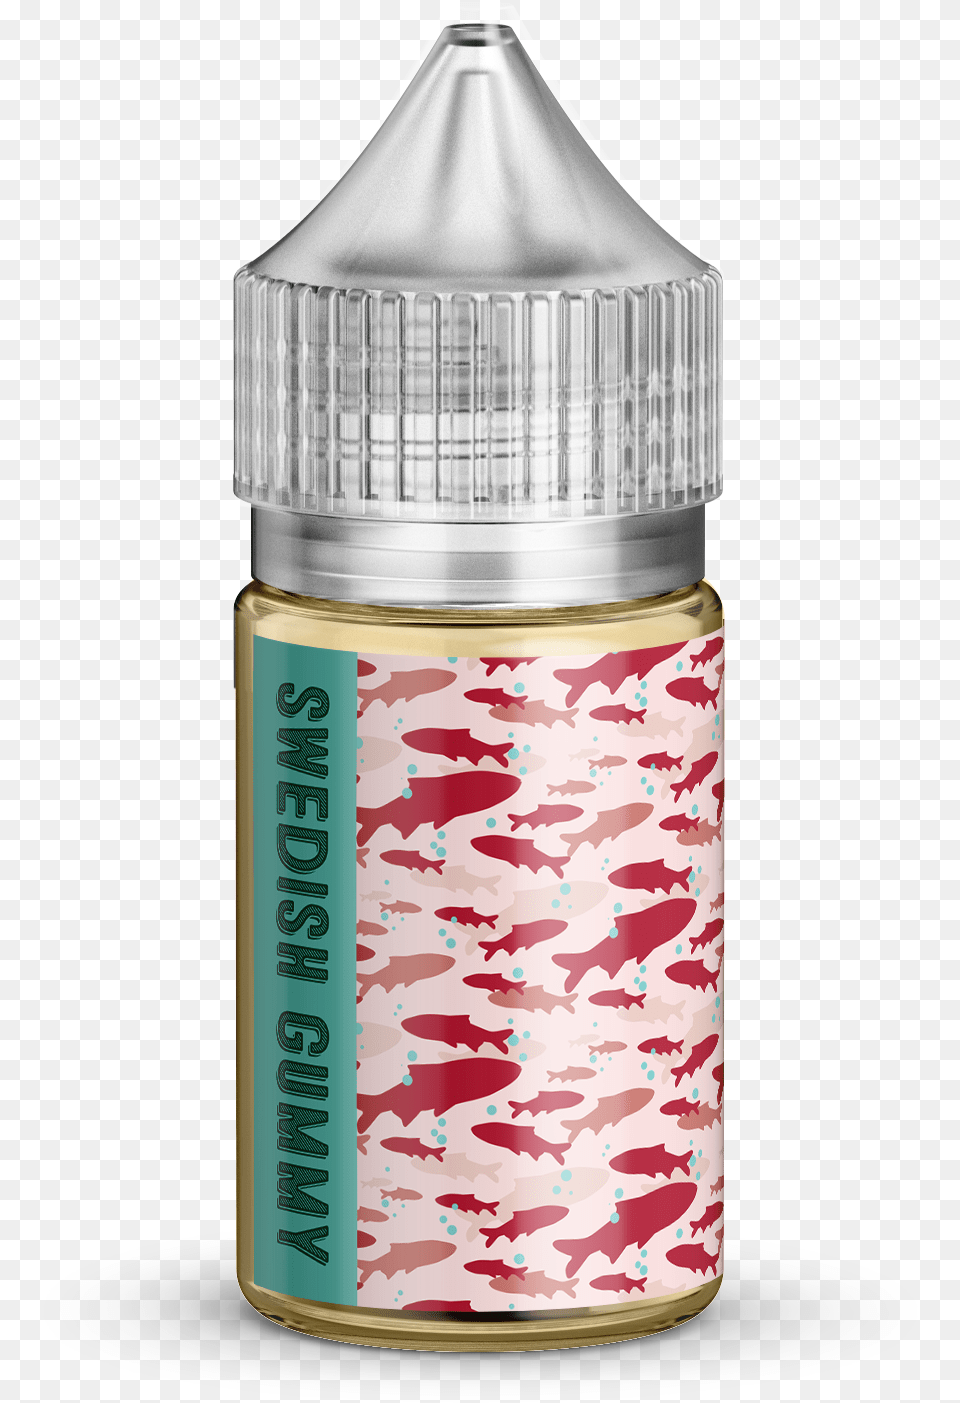 Swedish Gummy From Everyday Eliquid By Three Dukes Composition Of Electronic Cigarette Aerosol, Jar, Bottle, Cosmetics, Paint Container Free Png Download